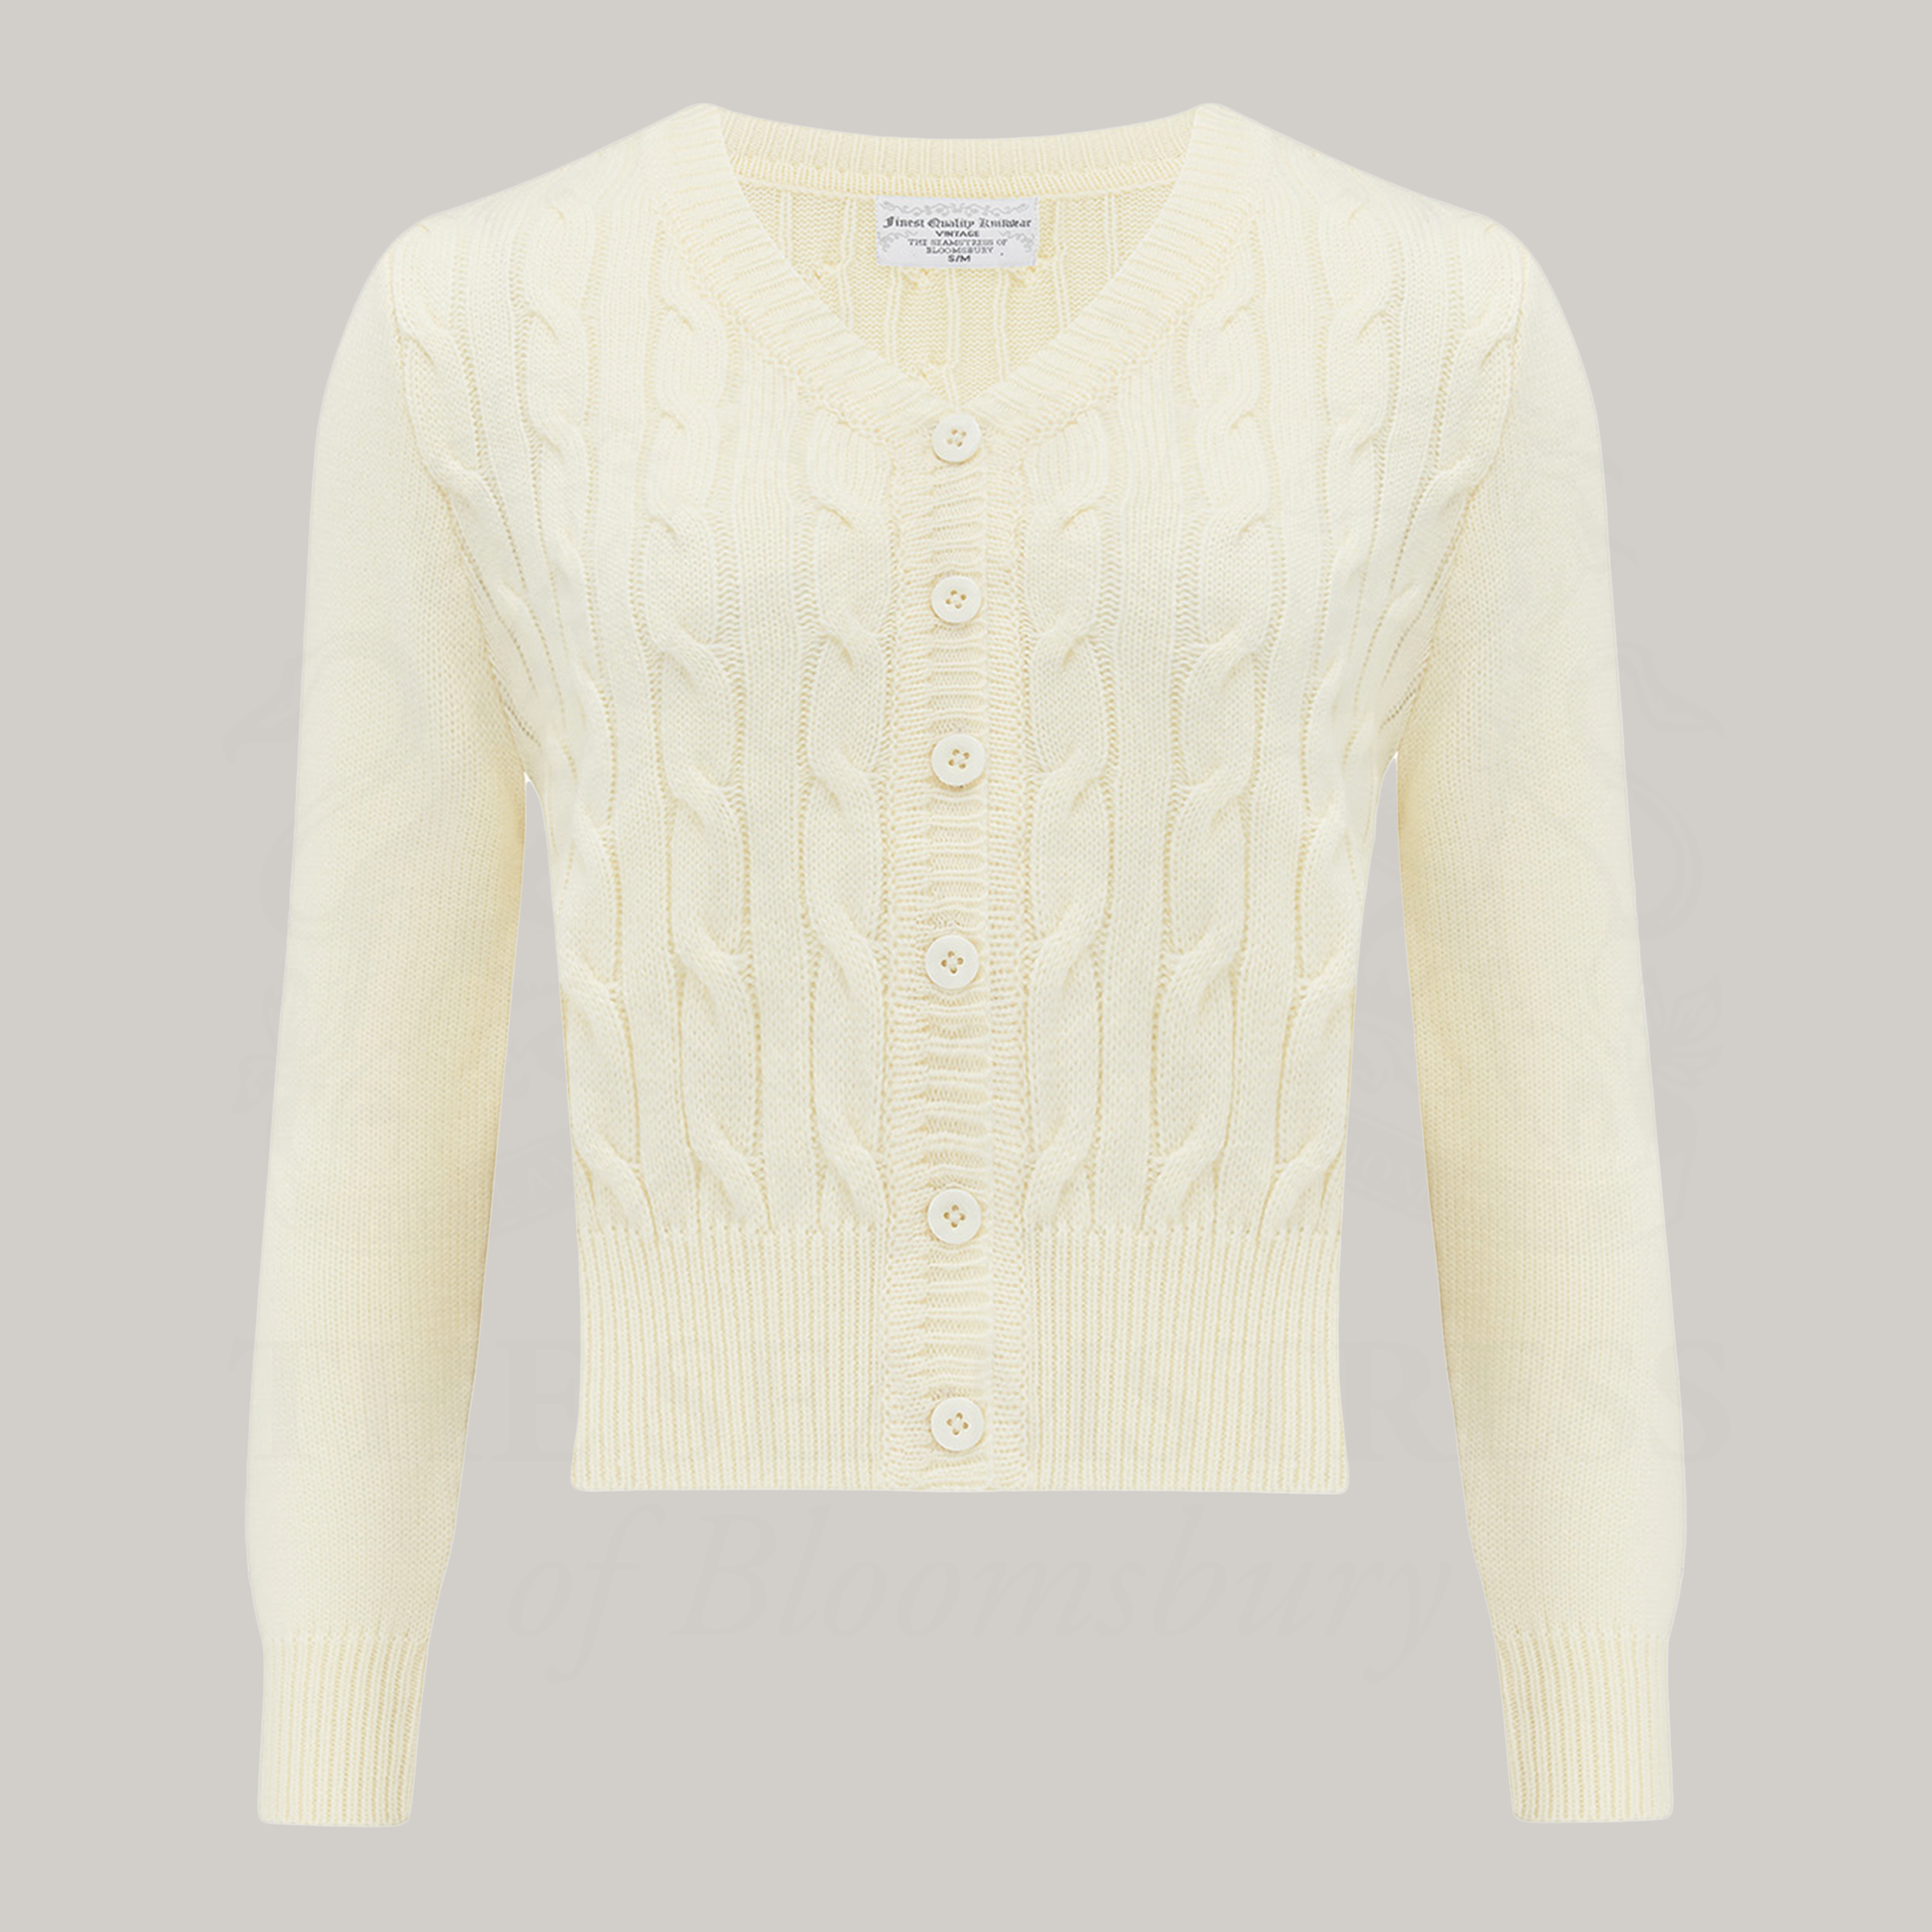 A 1940s style cable knitted cardigan in cream. Matching cream buttons feature down the front of the cardigan.